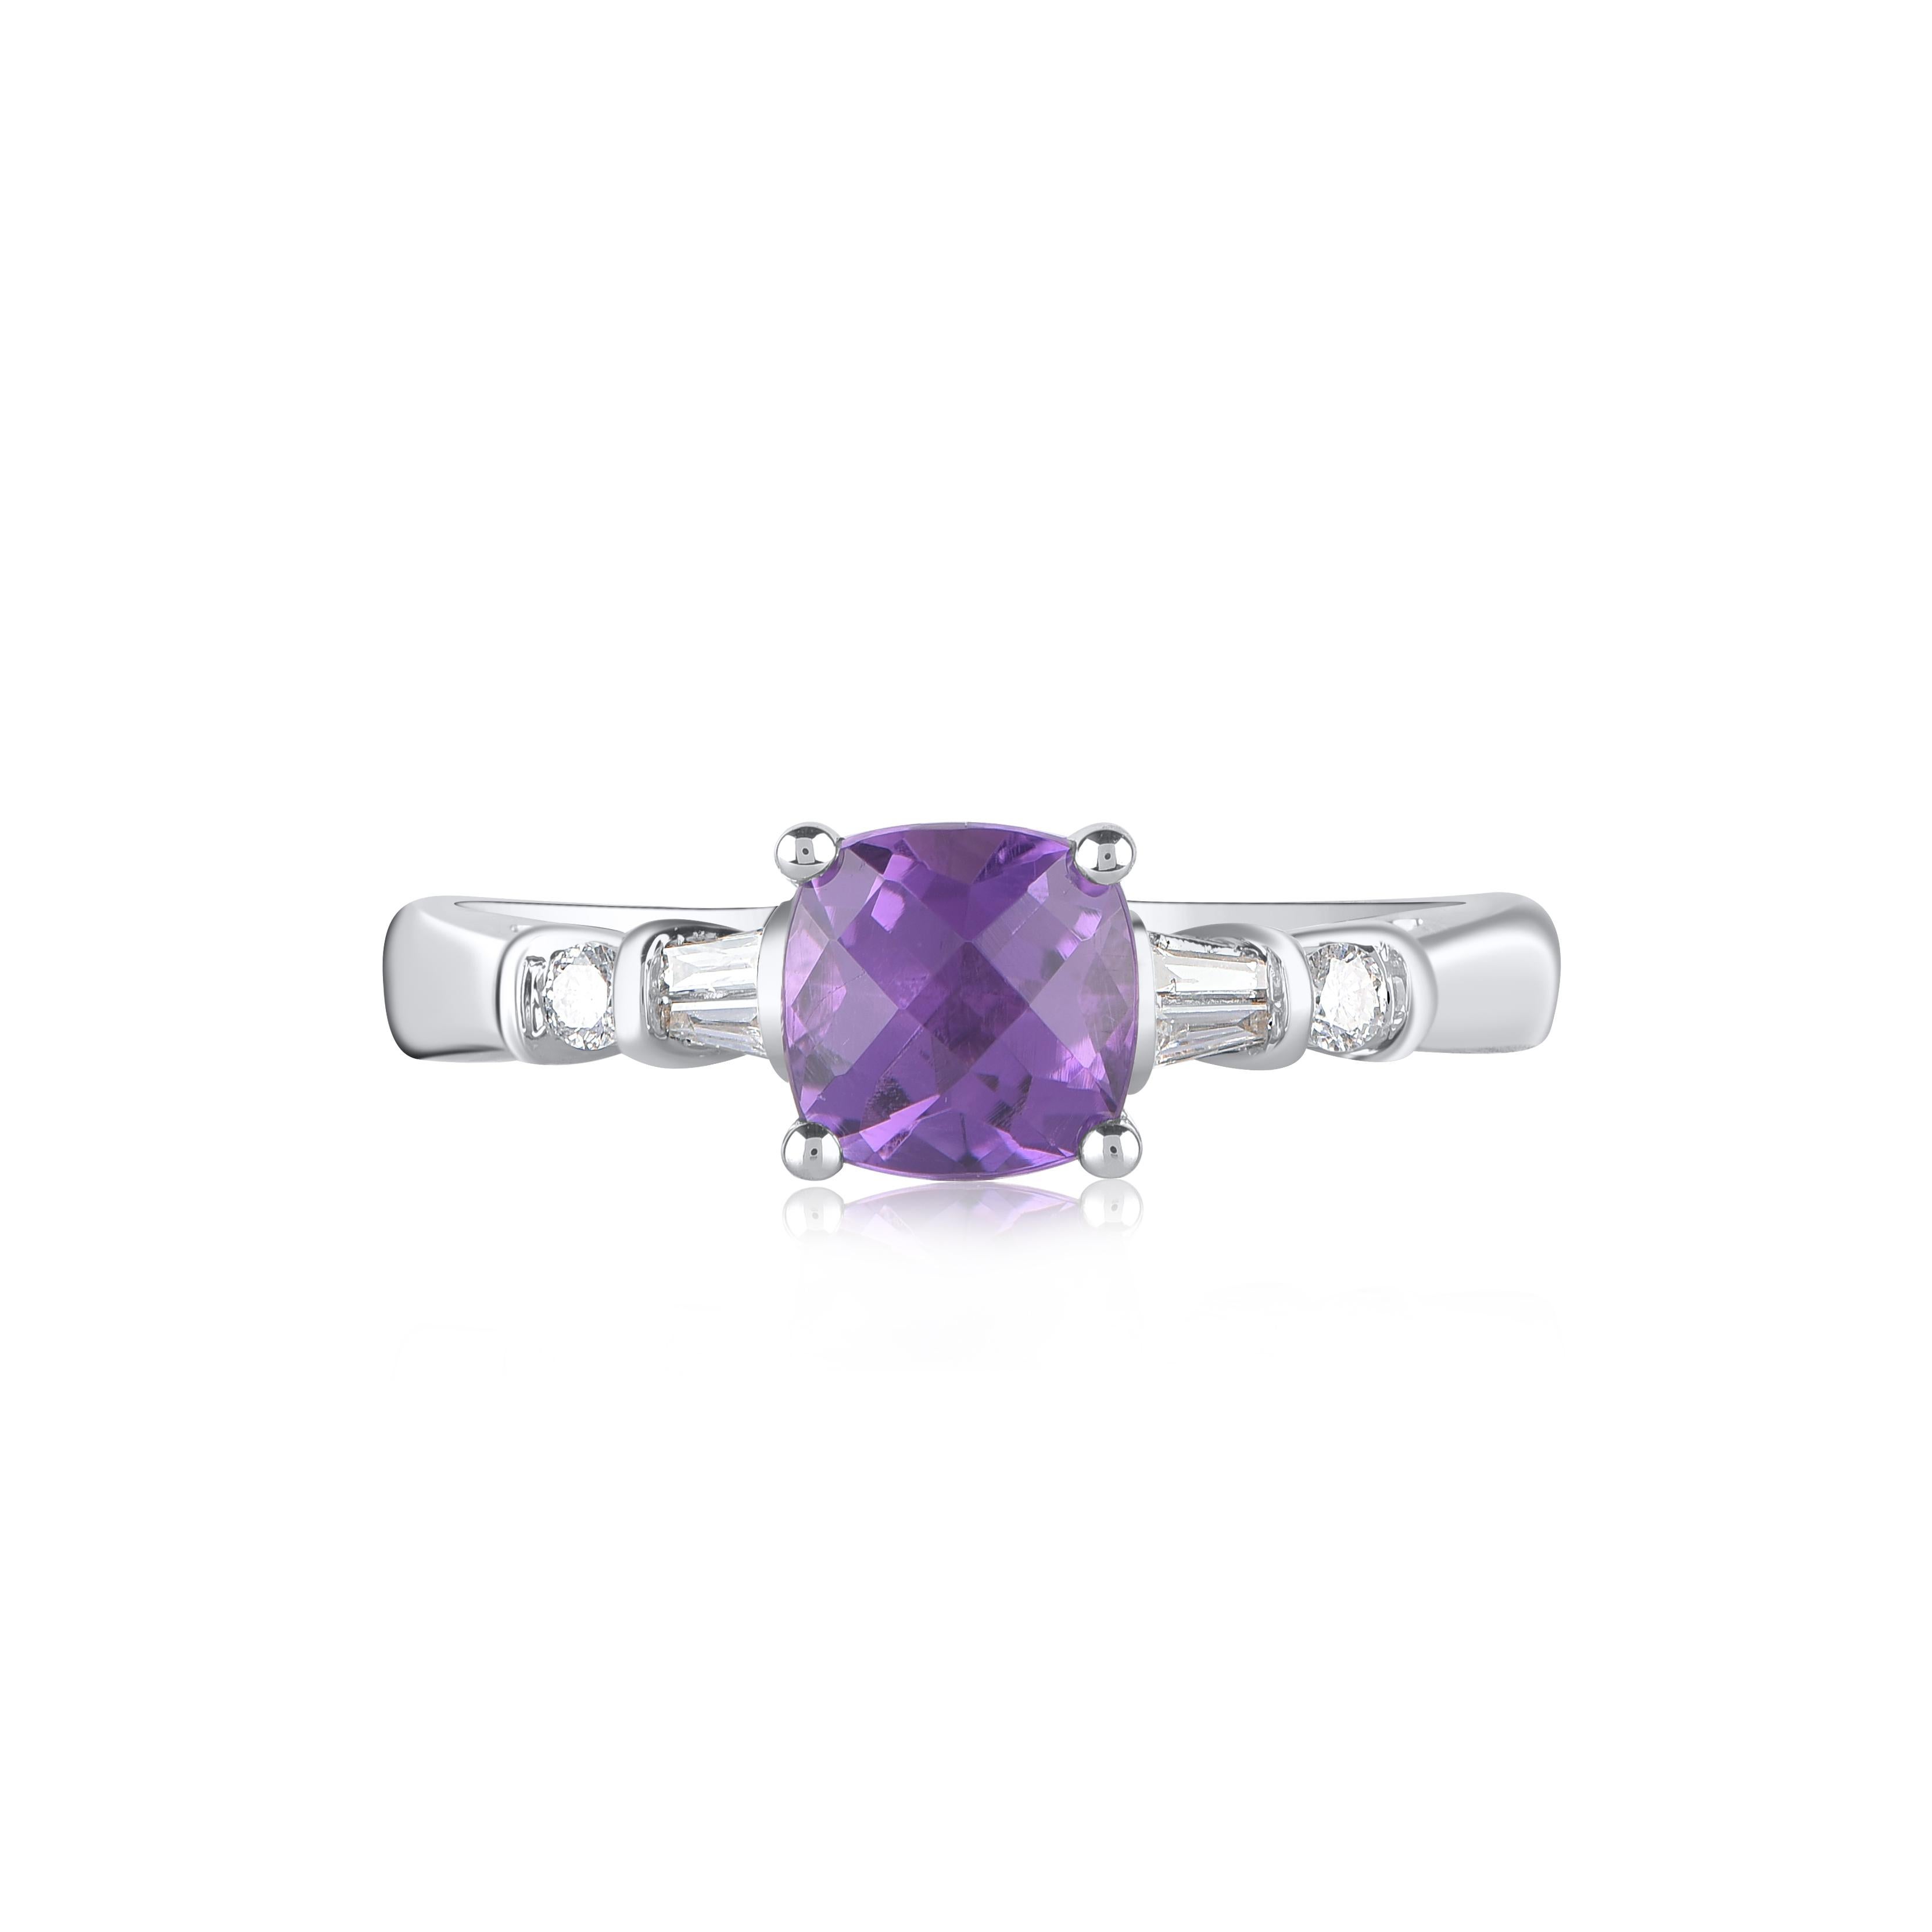 Bring charm to your look with this cushion cut amethyst classic and modern ring. Beautifully crafted by our inhouse experts in 14 karat white gold and embellished with 2 brilliant cut round diamond, 4 baguette diamond and 1 cushion cut amethyst set